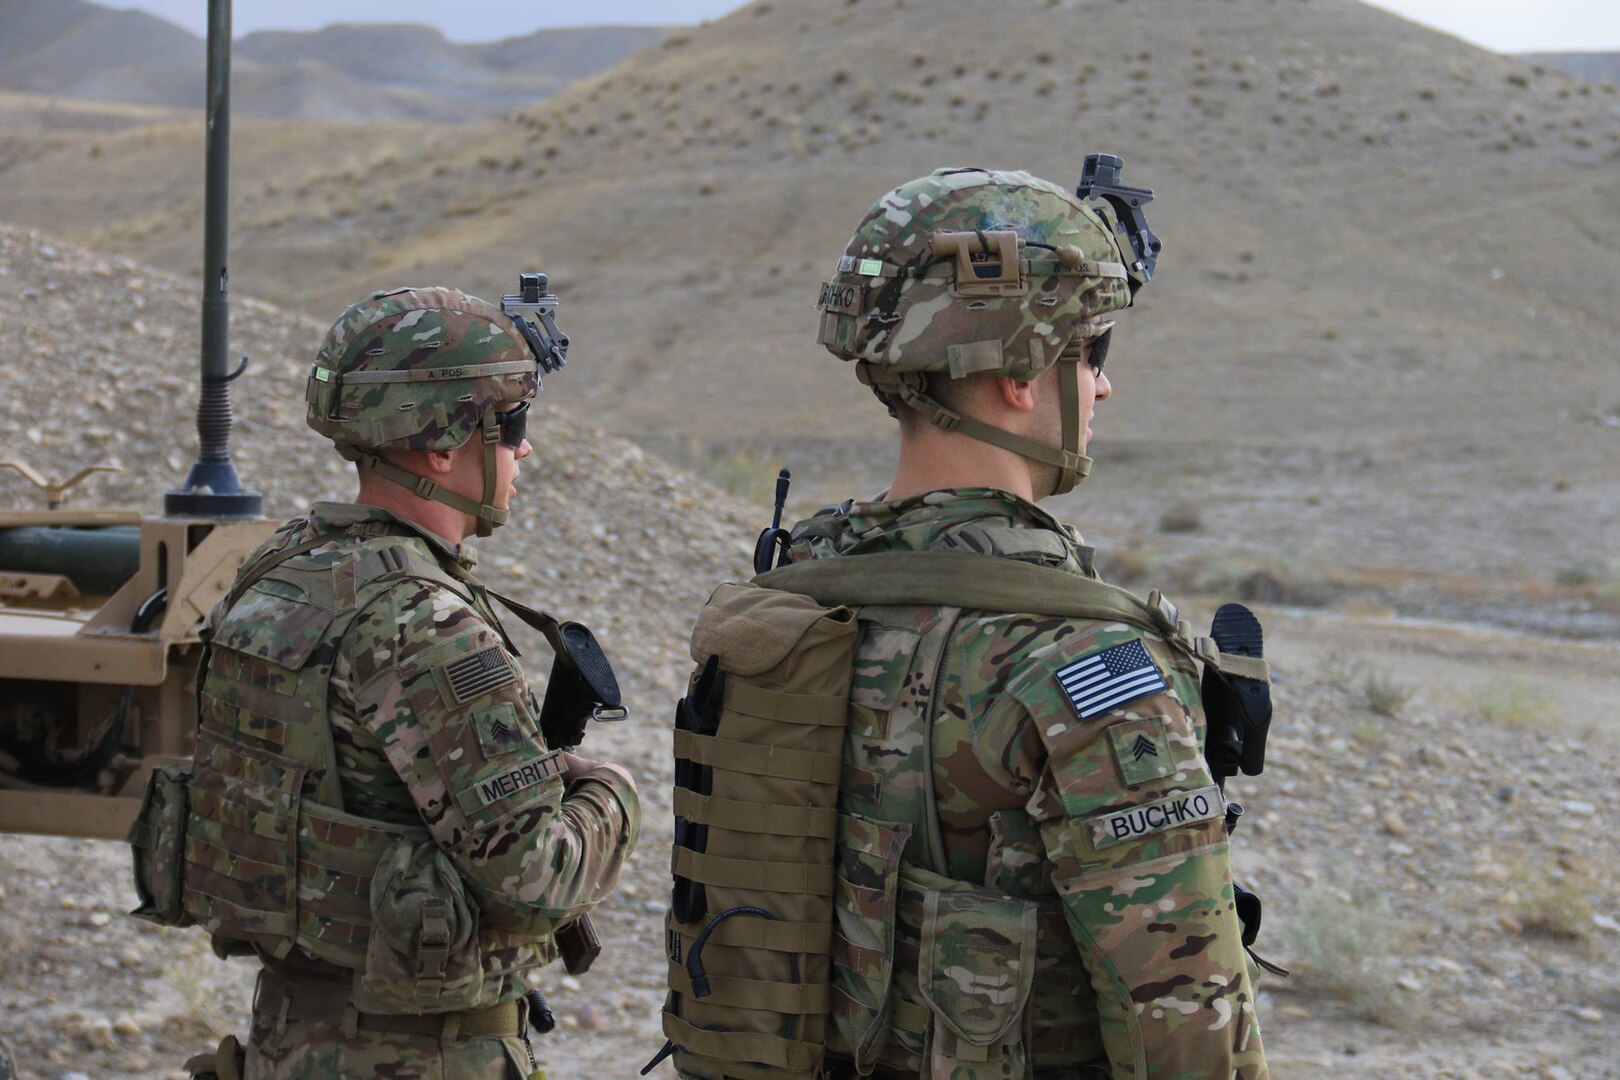 Two uniformed service members look out over desert terrain.